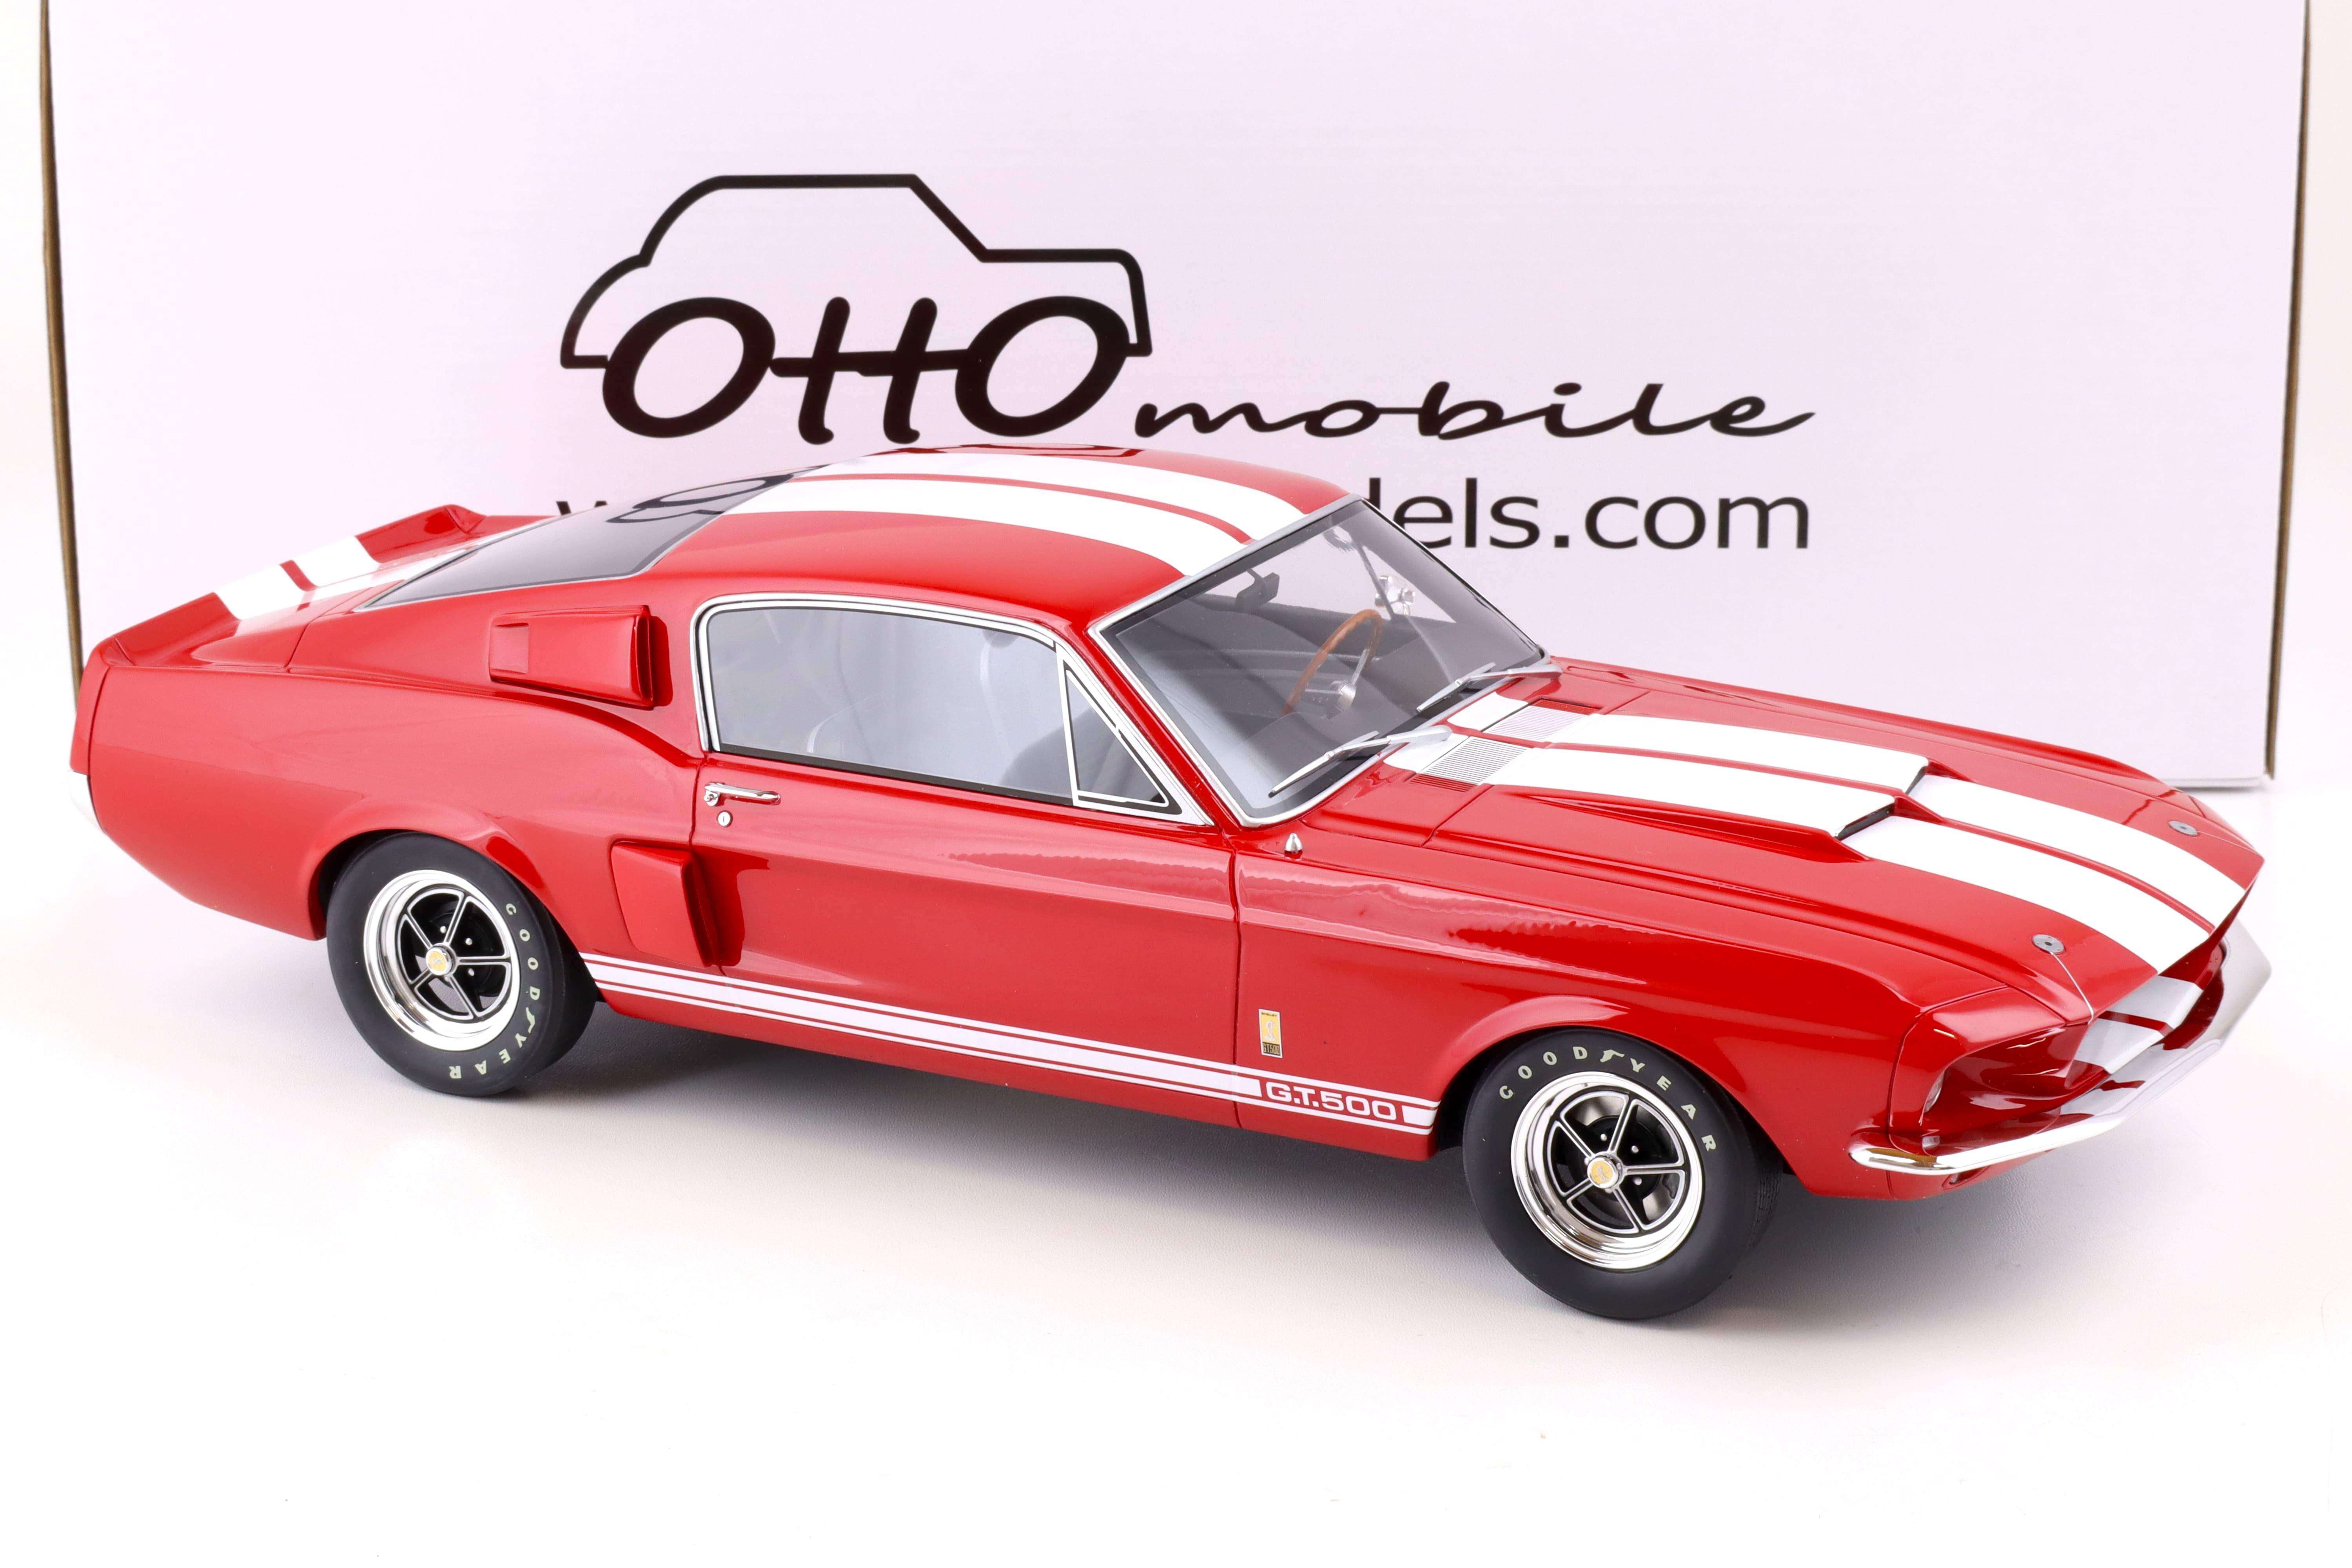 1:12 OTTO mobile G056 Ford Mustang Shelby GT500 Fastback red/ white stripes